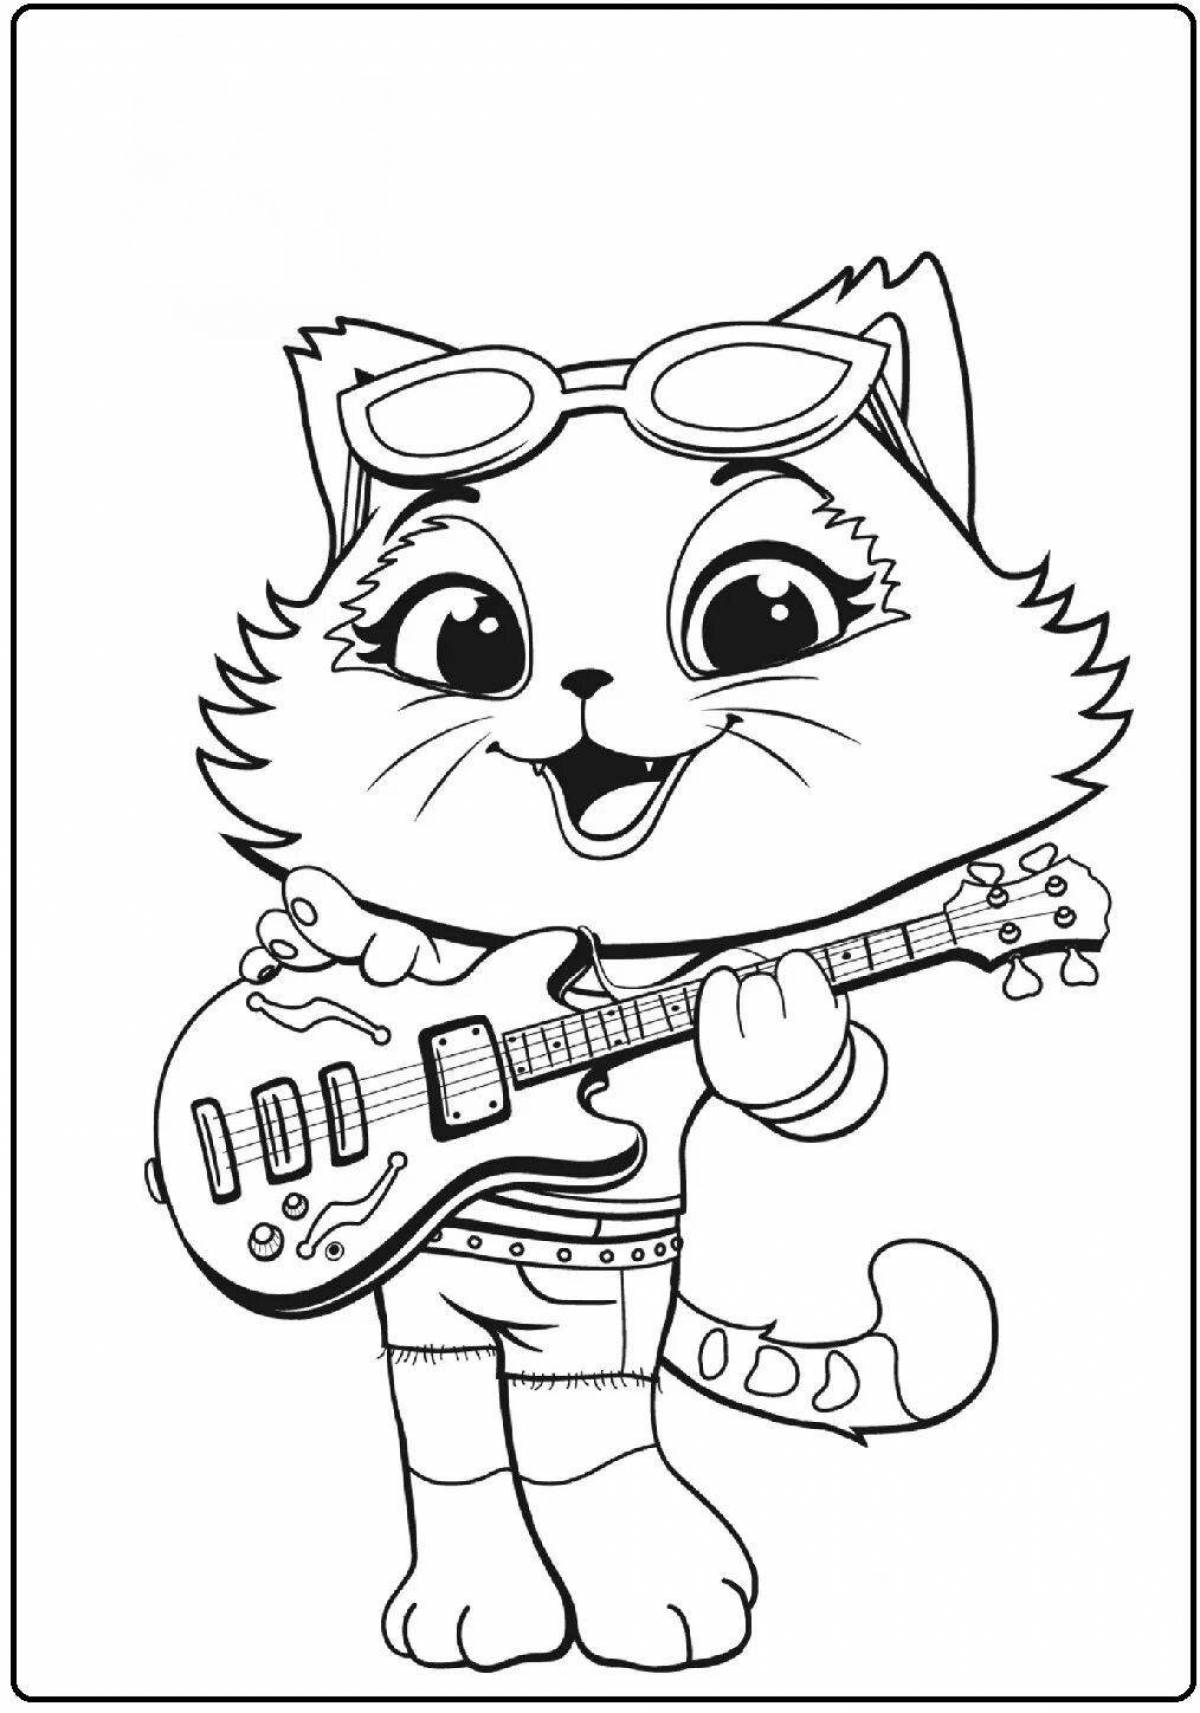 Amazing mrrr meow coloring page